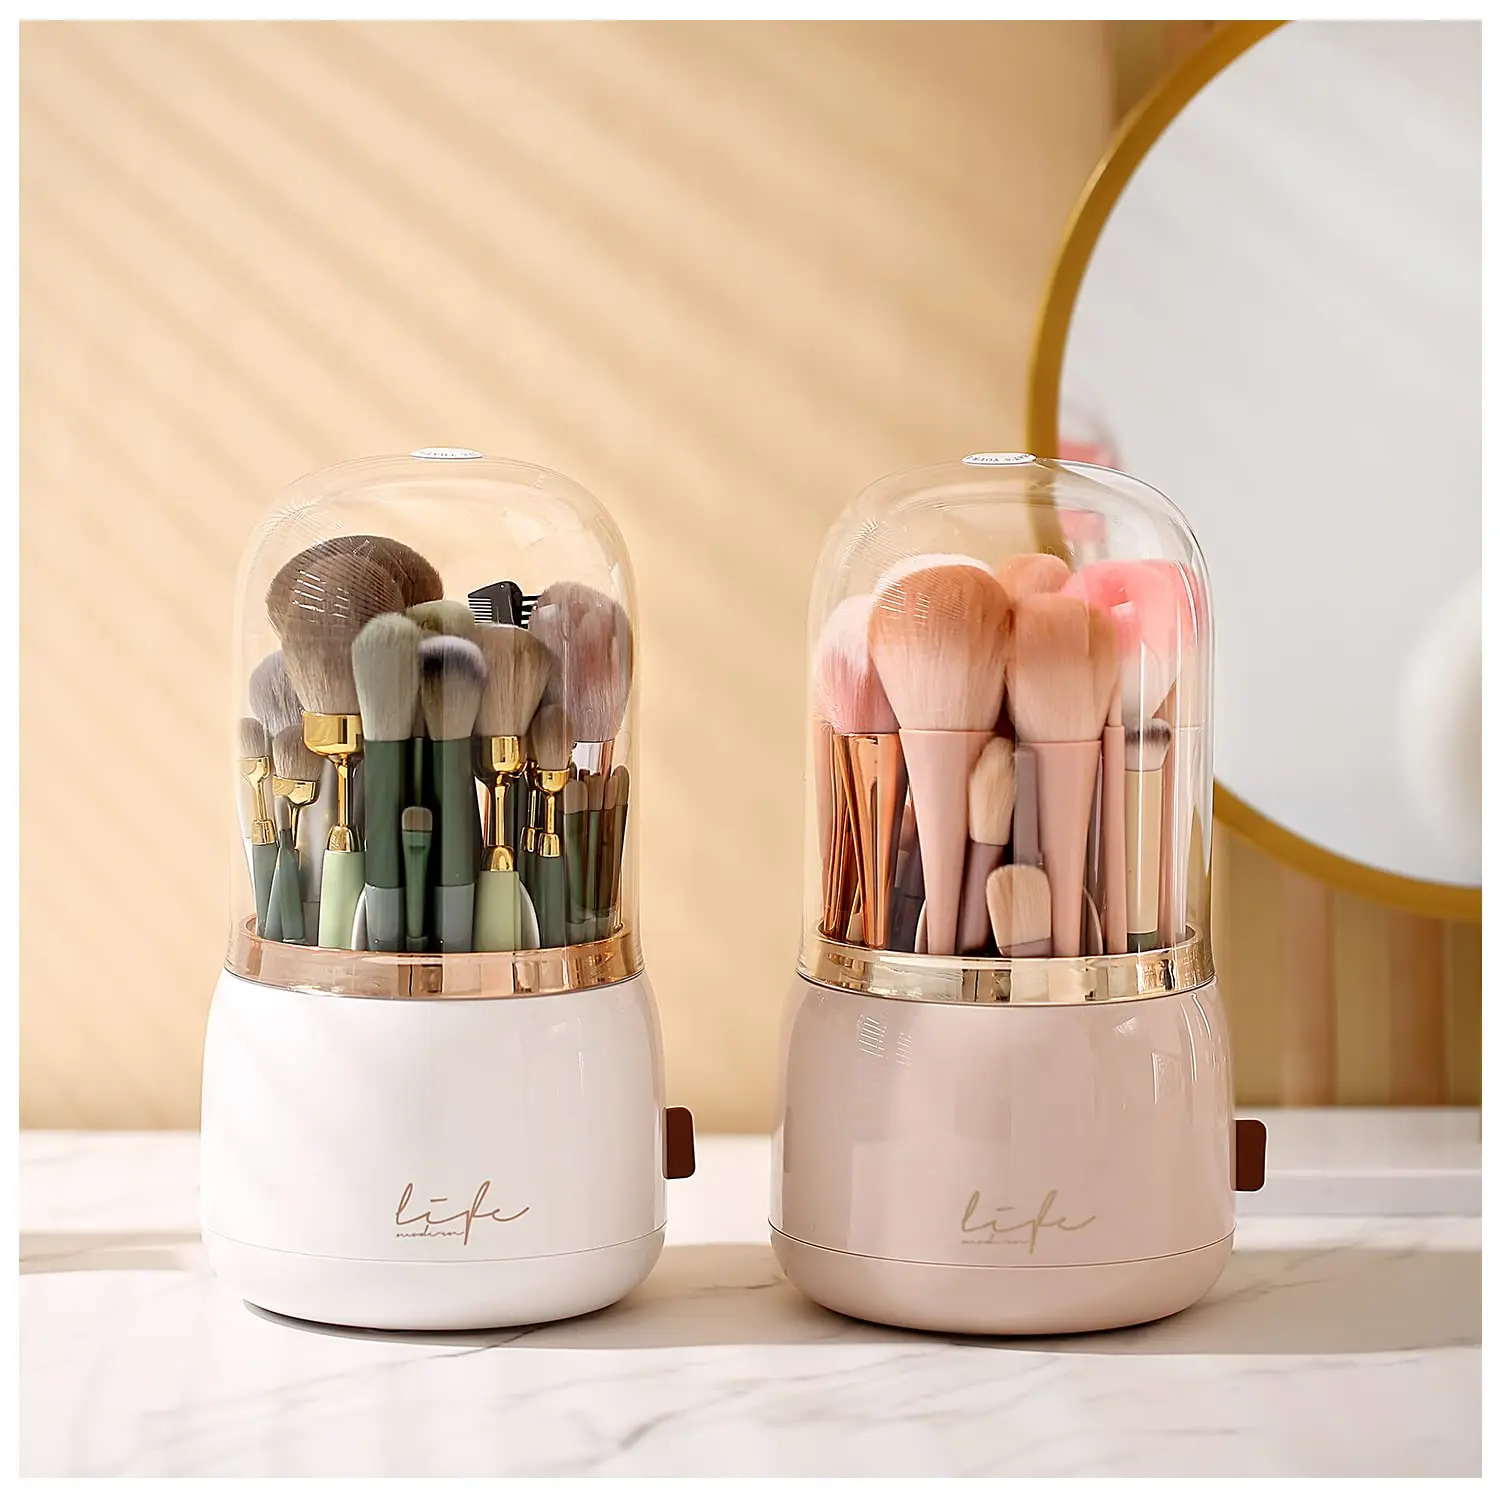 Generic Makeup Brush Holder, 360-degree Rotating Organizer, With A